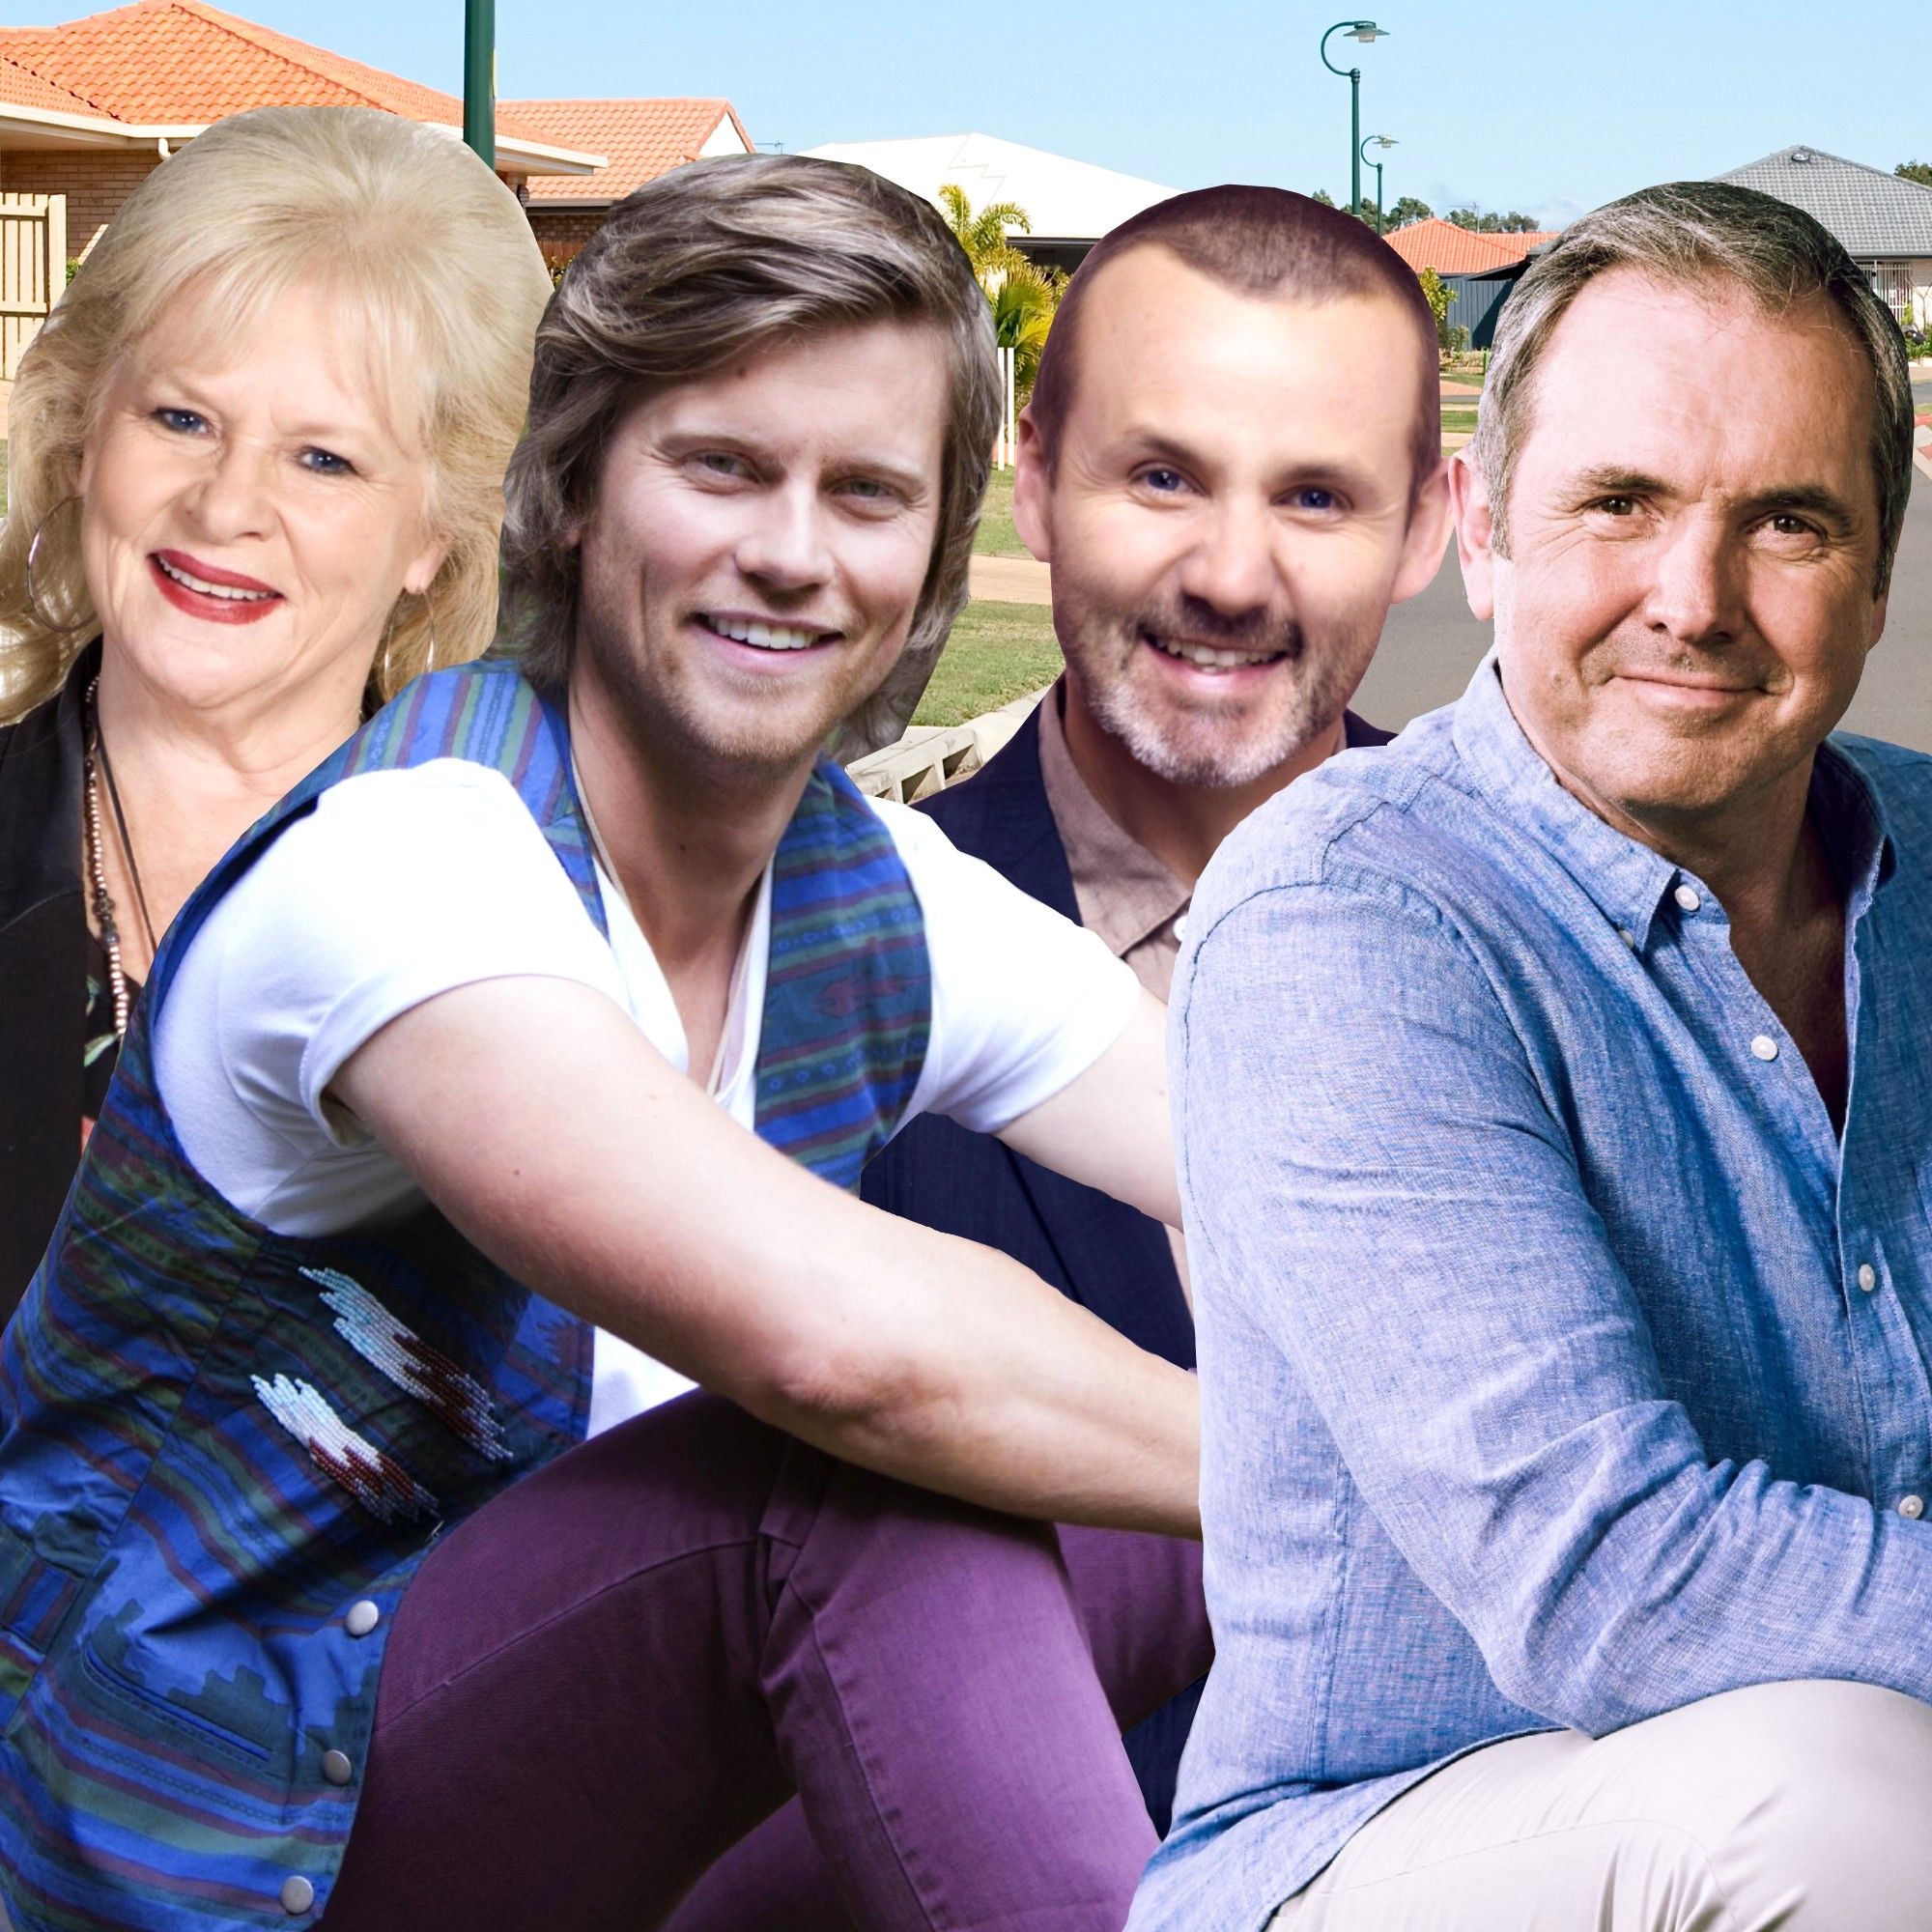 Neighbours on X: More #Neighbours cast than you can shake a stick at  #Neighbours30  / X